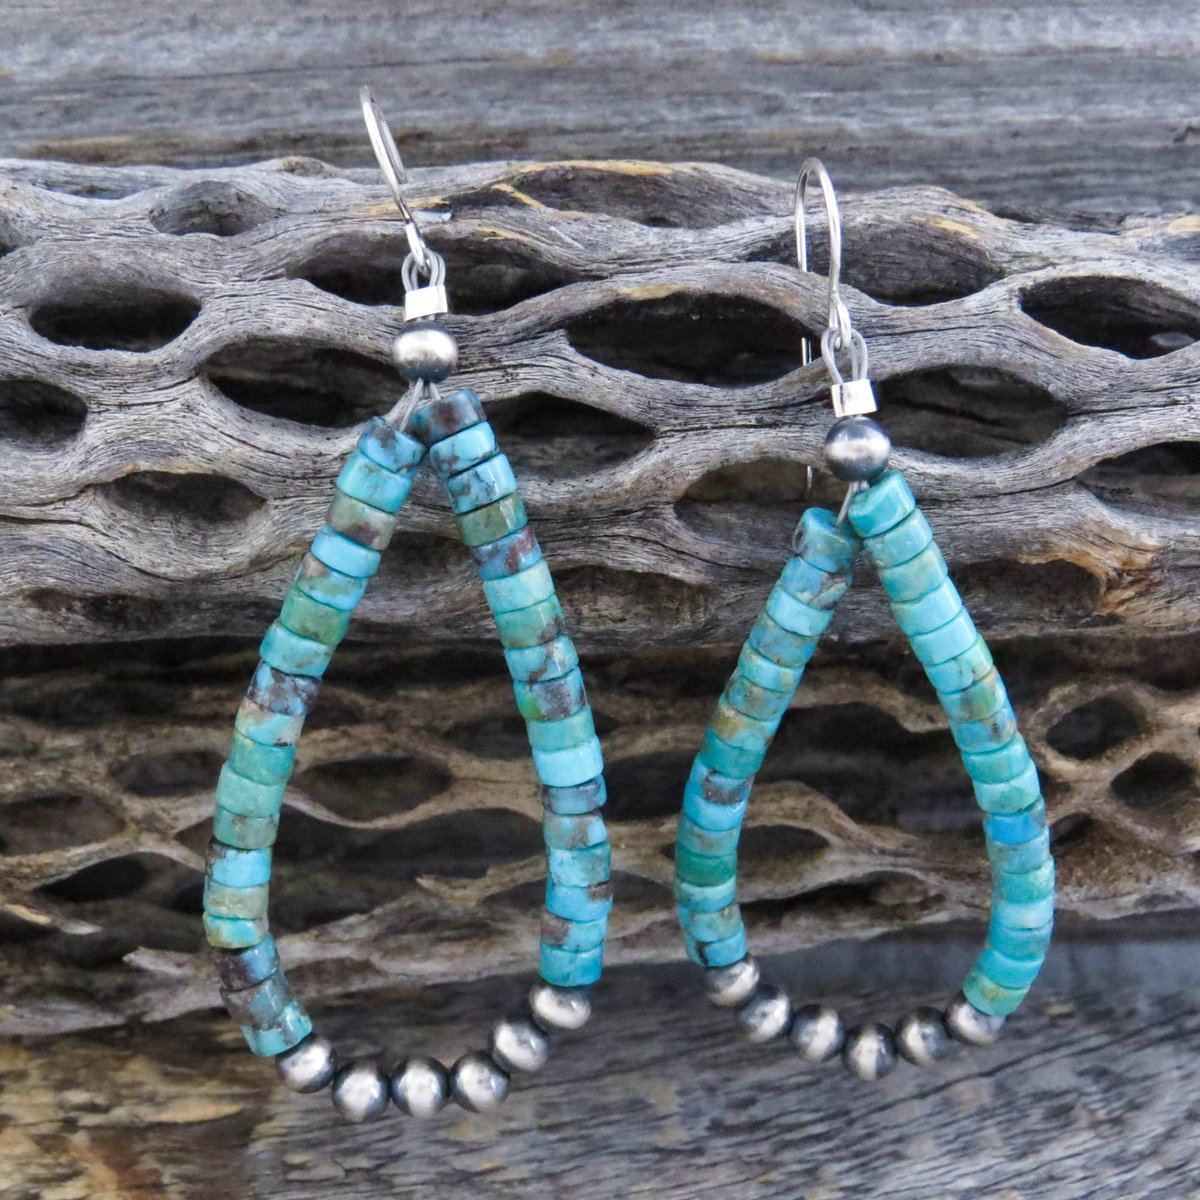 Mother's Day Turquoise & Silver Hoops #hoops #earrings
❤️️SAVE 30%~SHOP HERE: etsy.me/3L6ICpV❤️️ 
#turquoiseearrings #mothersdaygifts #navajojewelry #nativeamericanjewelry #bobhohippie